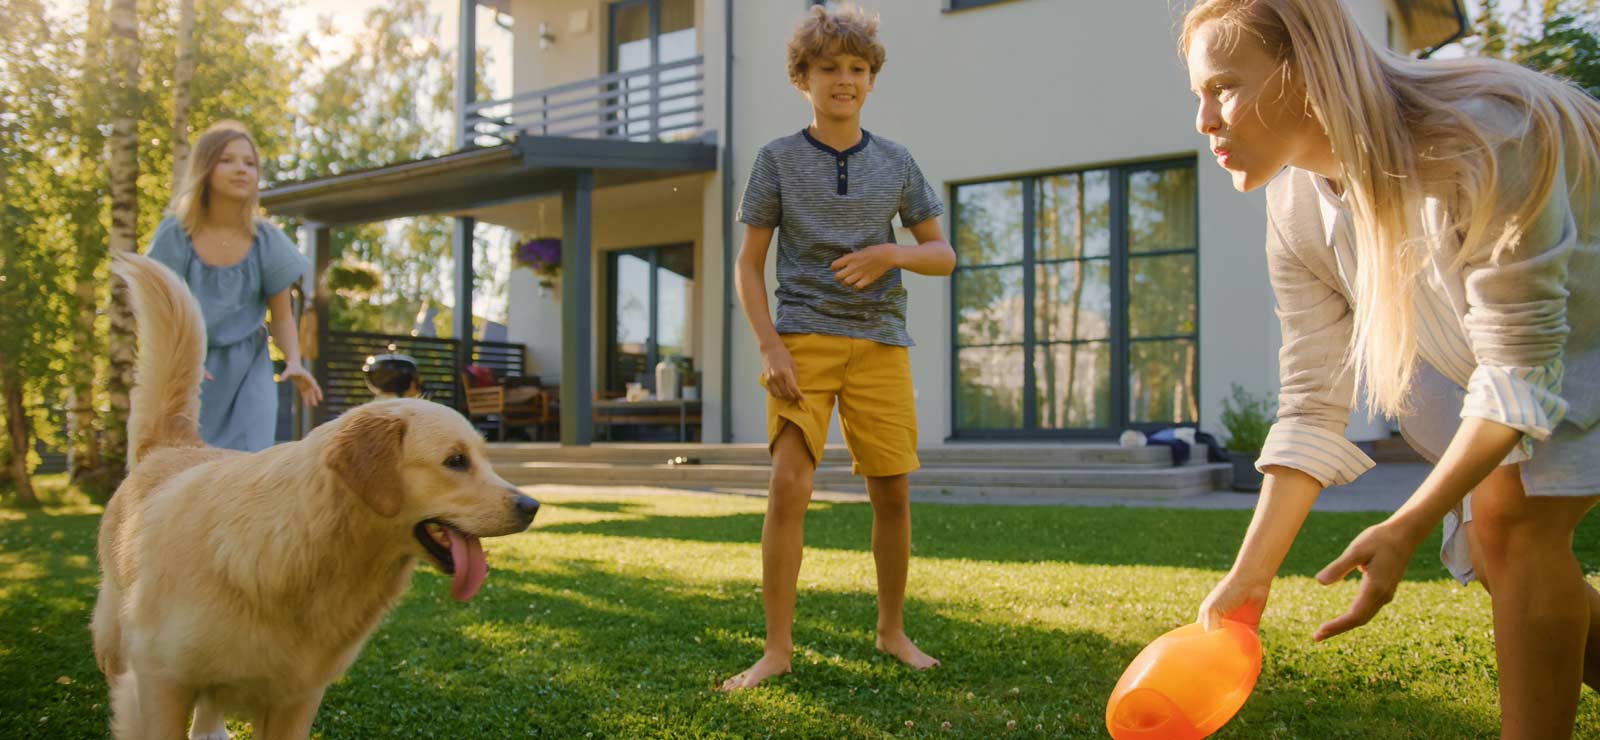 A picture of a dog with an adult male and female standing on a lawn